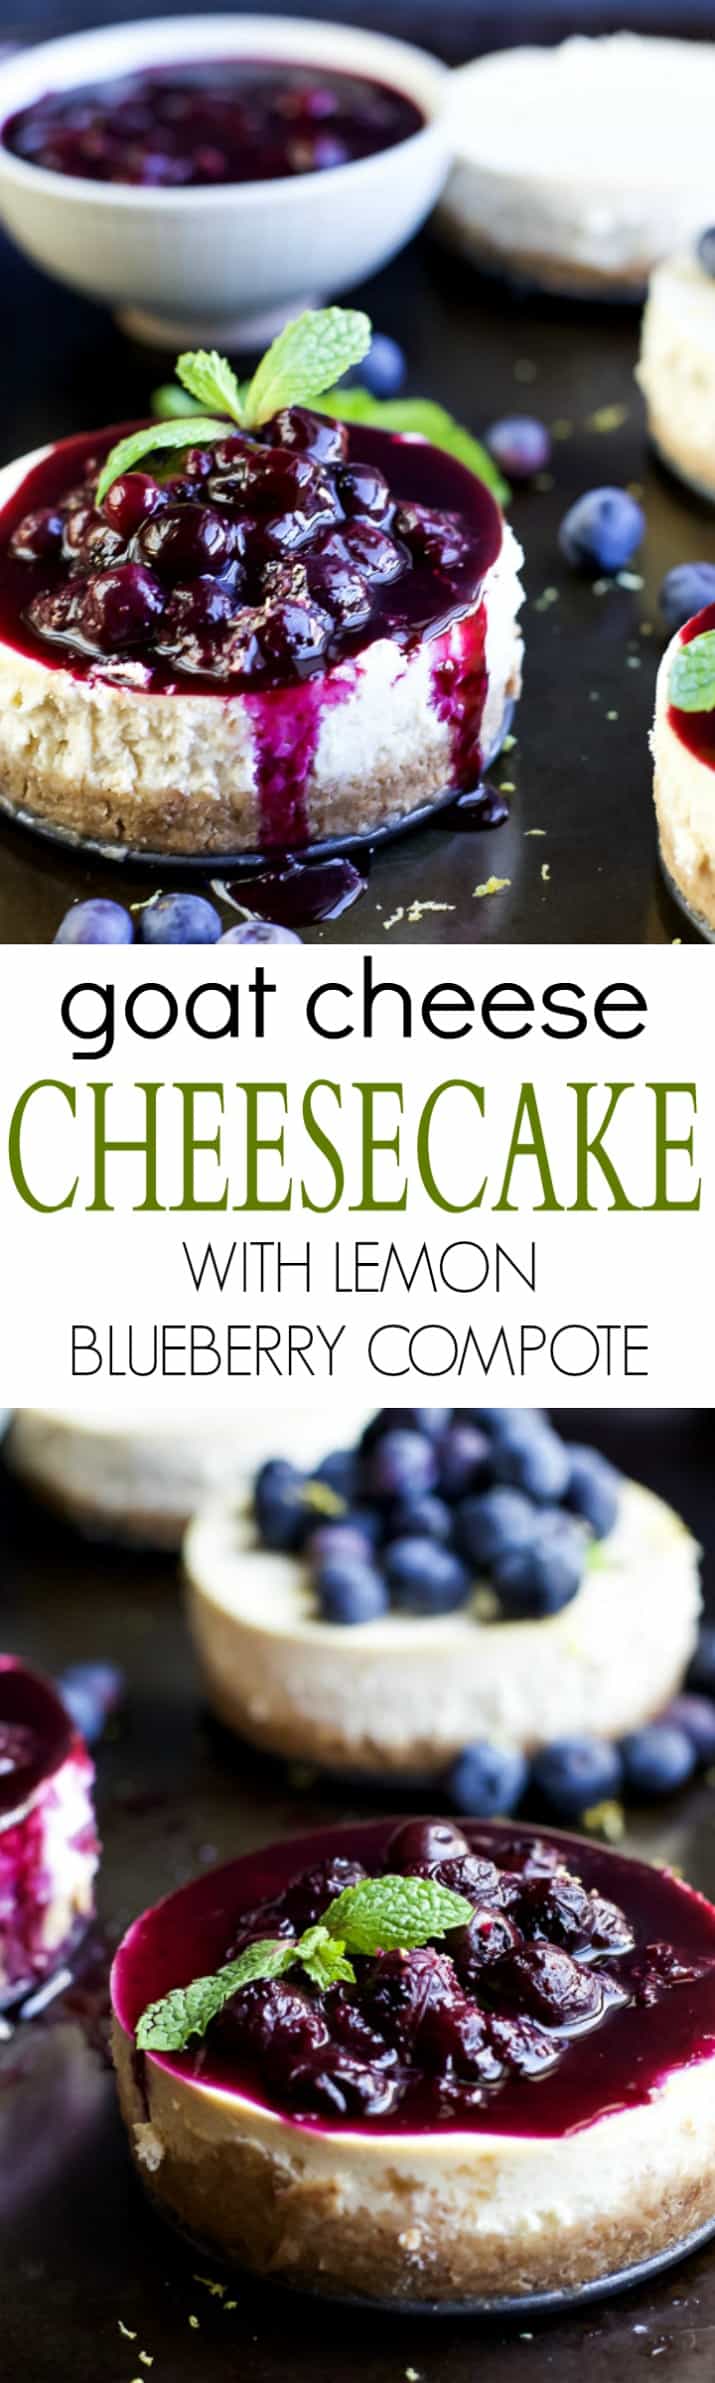 Goat Cheese Cheesecake with Lemon Blueberry Compote recipe collage